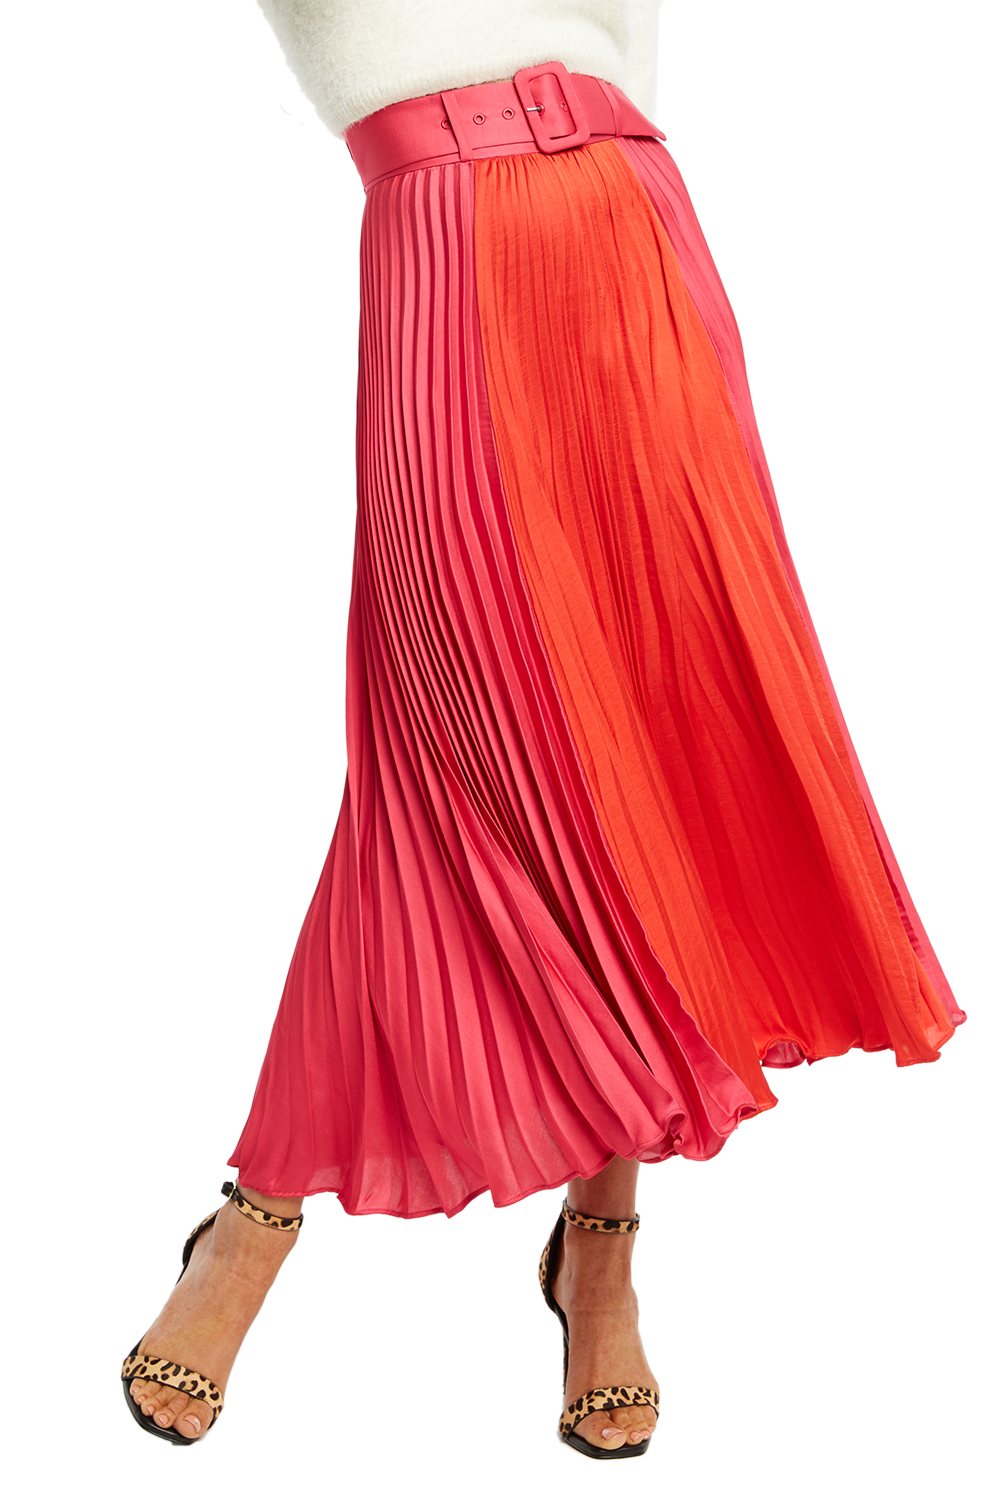 Two Tone Pleat Skirt in Pink/red | Bardot